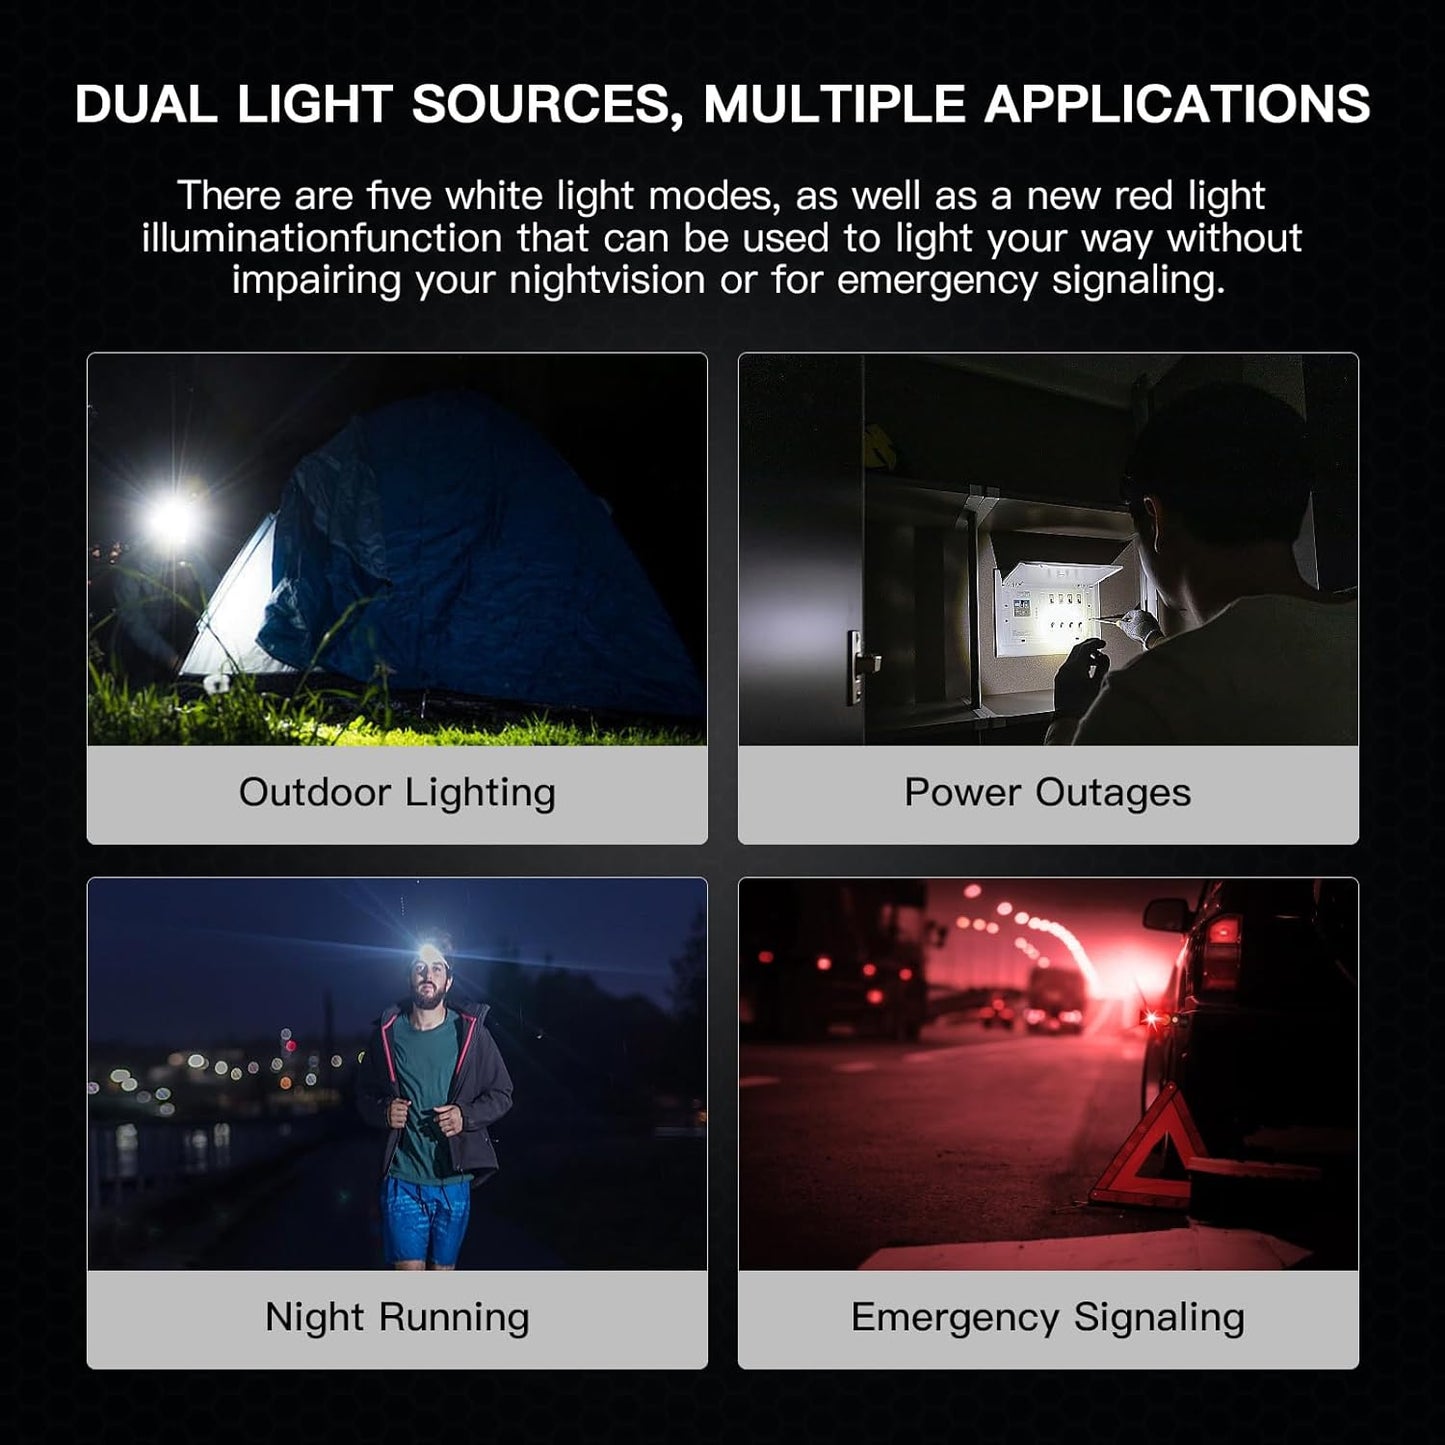 Wurkkos Led Headlamp Rechargeable High Lumen, HD50 4000 Lumens Super Bright Head Lamp with White Red Light, 90 High CRI, Magnetic Tailcap, IP67 Waterproof Head Light for Camping Hiking Repairing